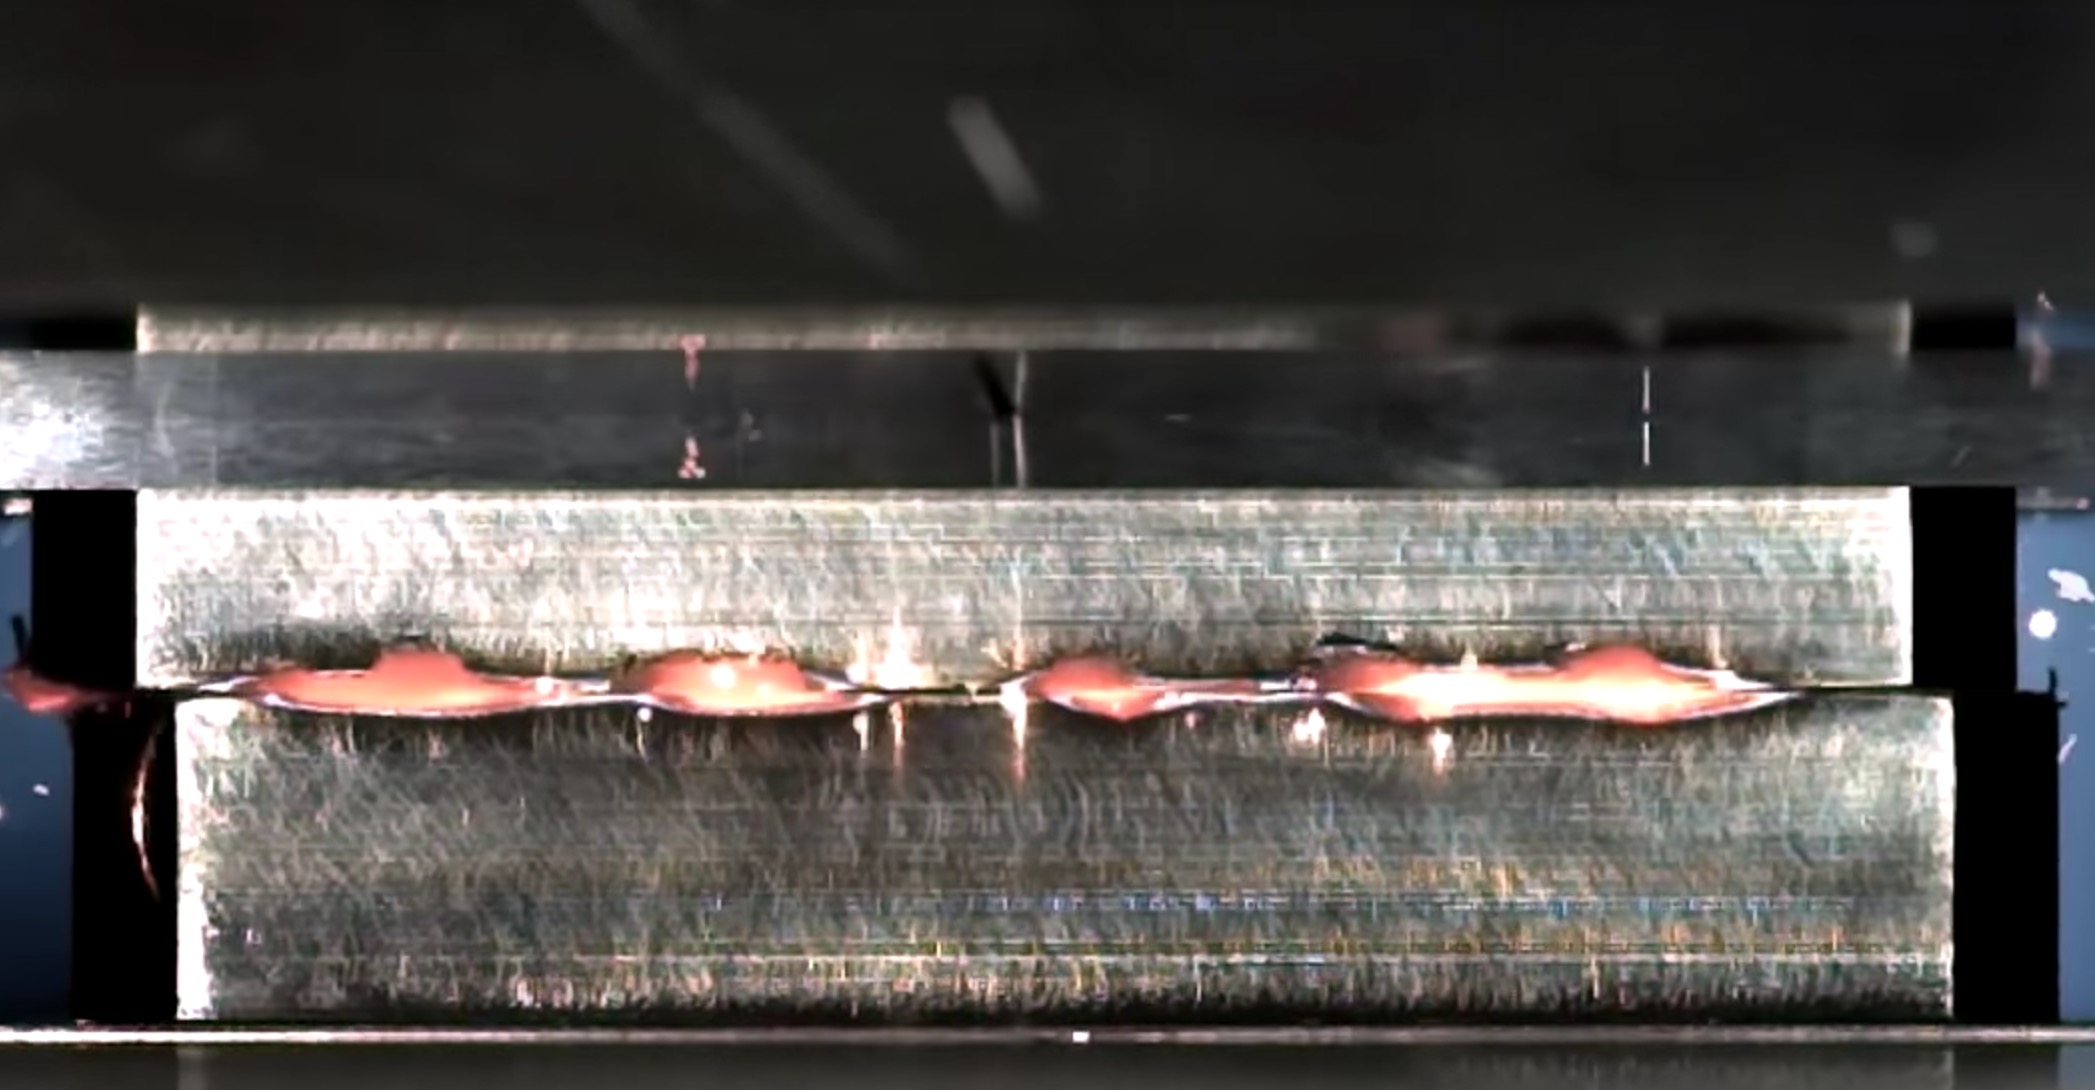  Friction welding - in slow motion! 